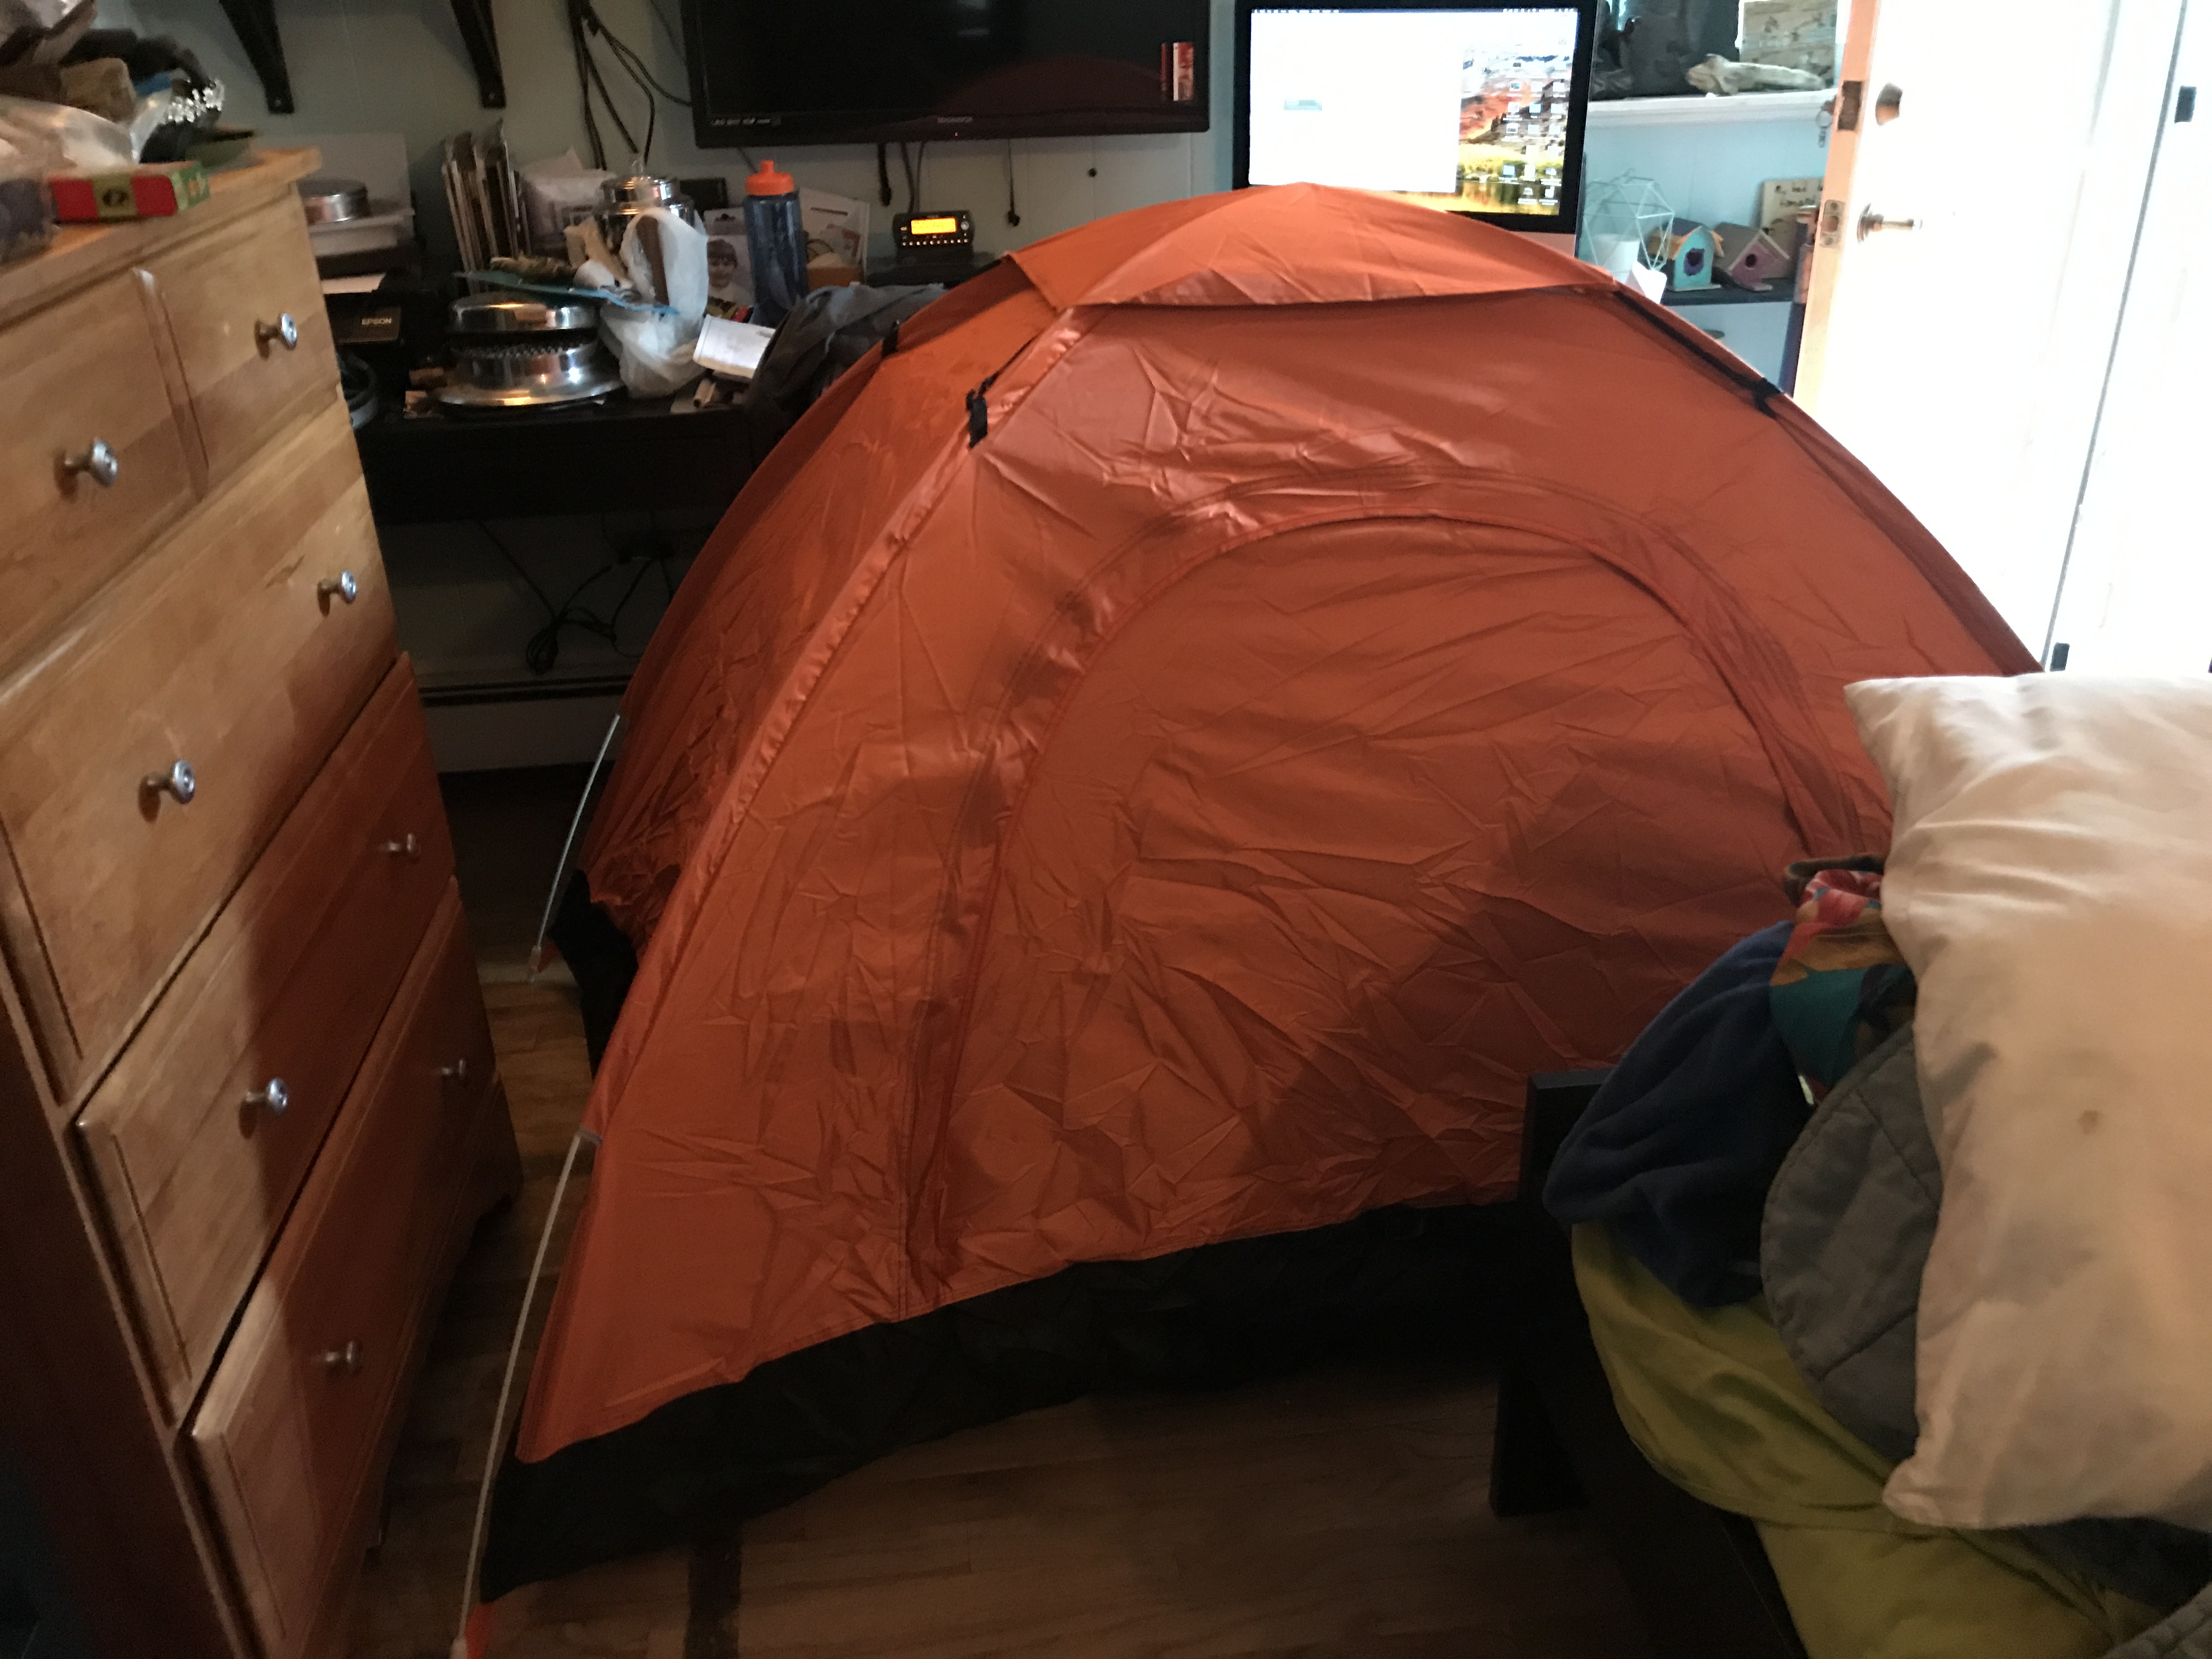 This tent fits in my tiny bedroom!